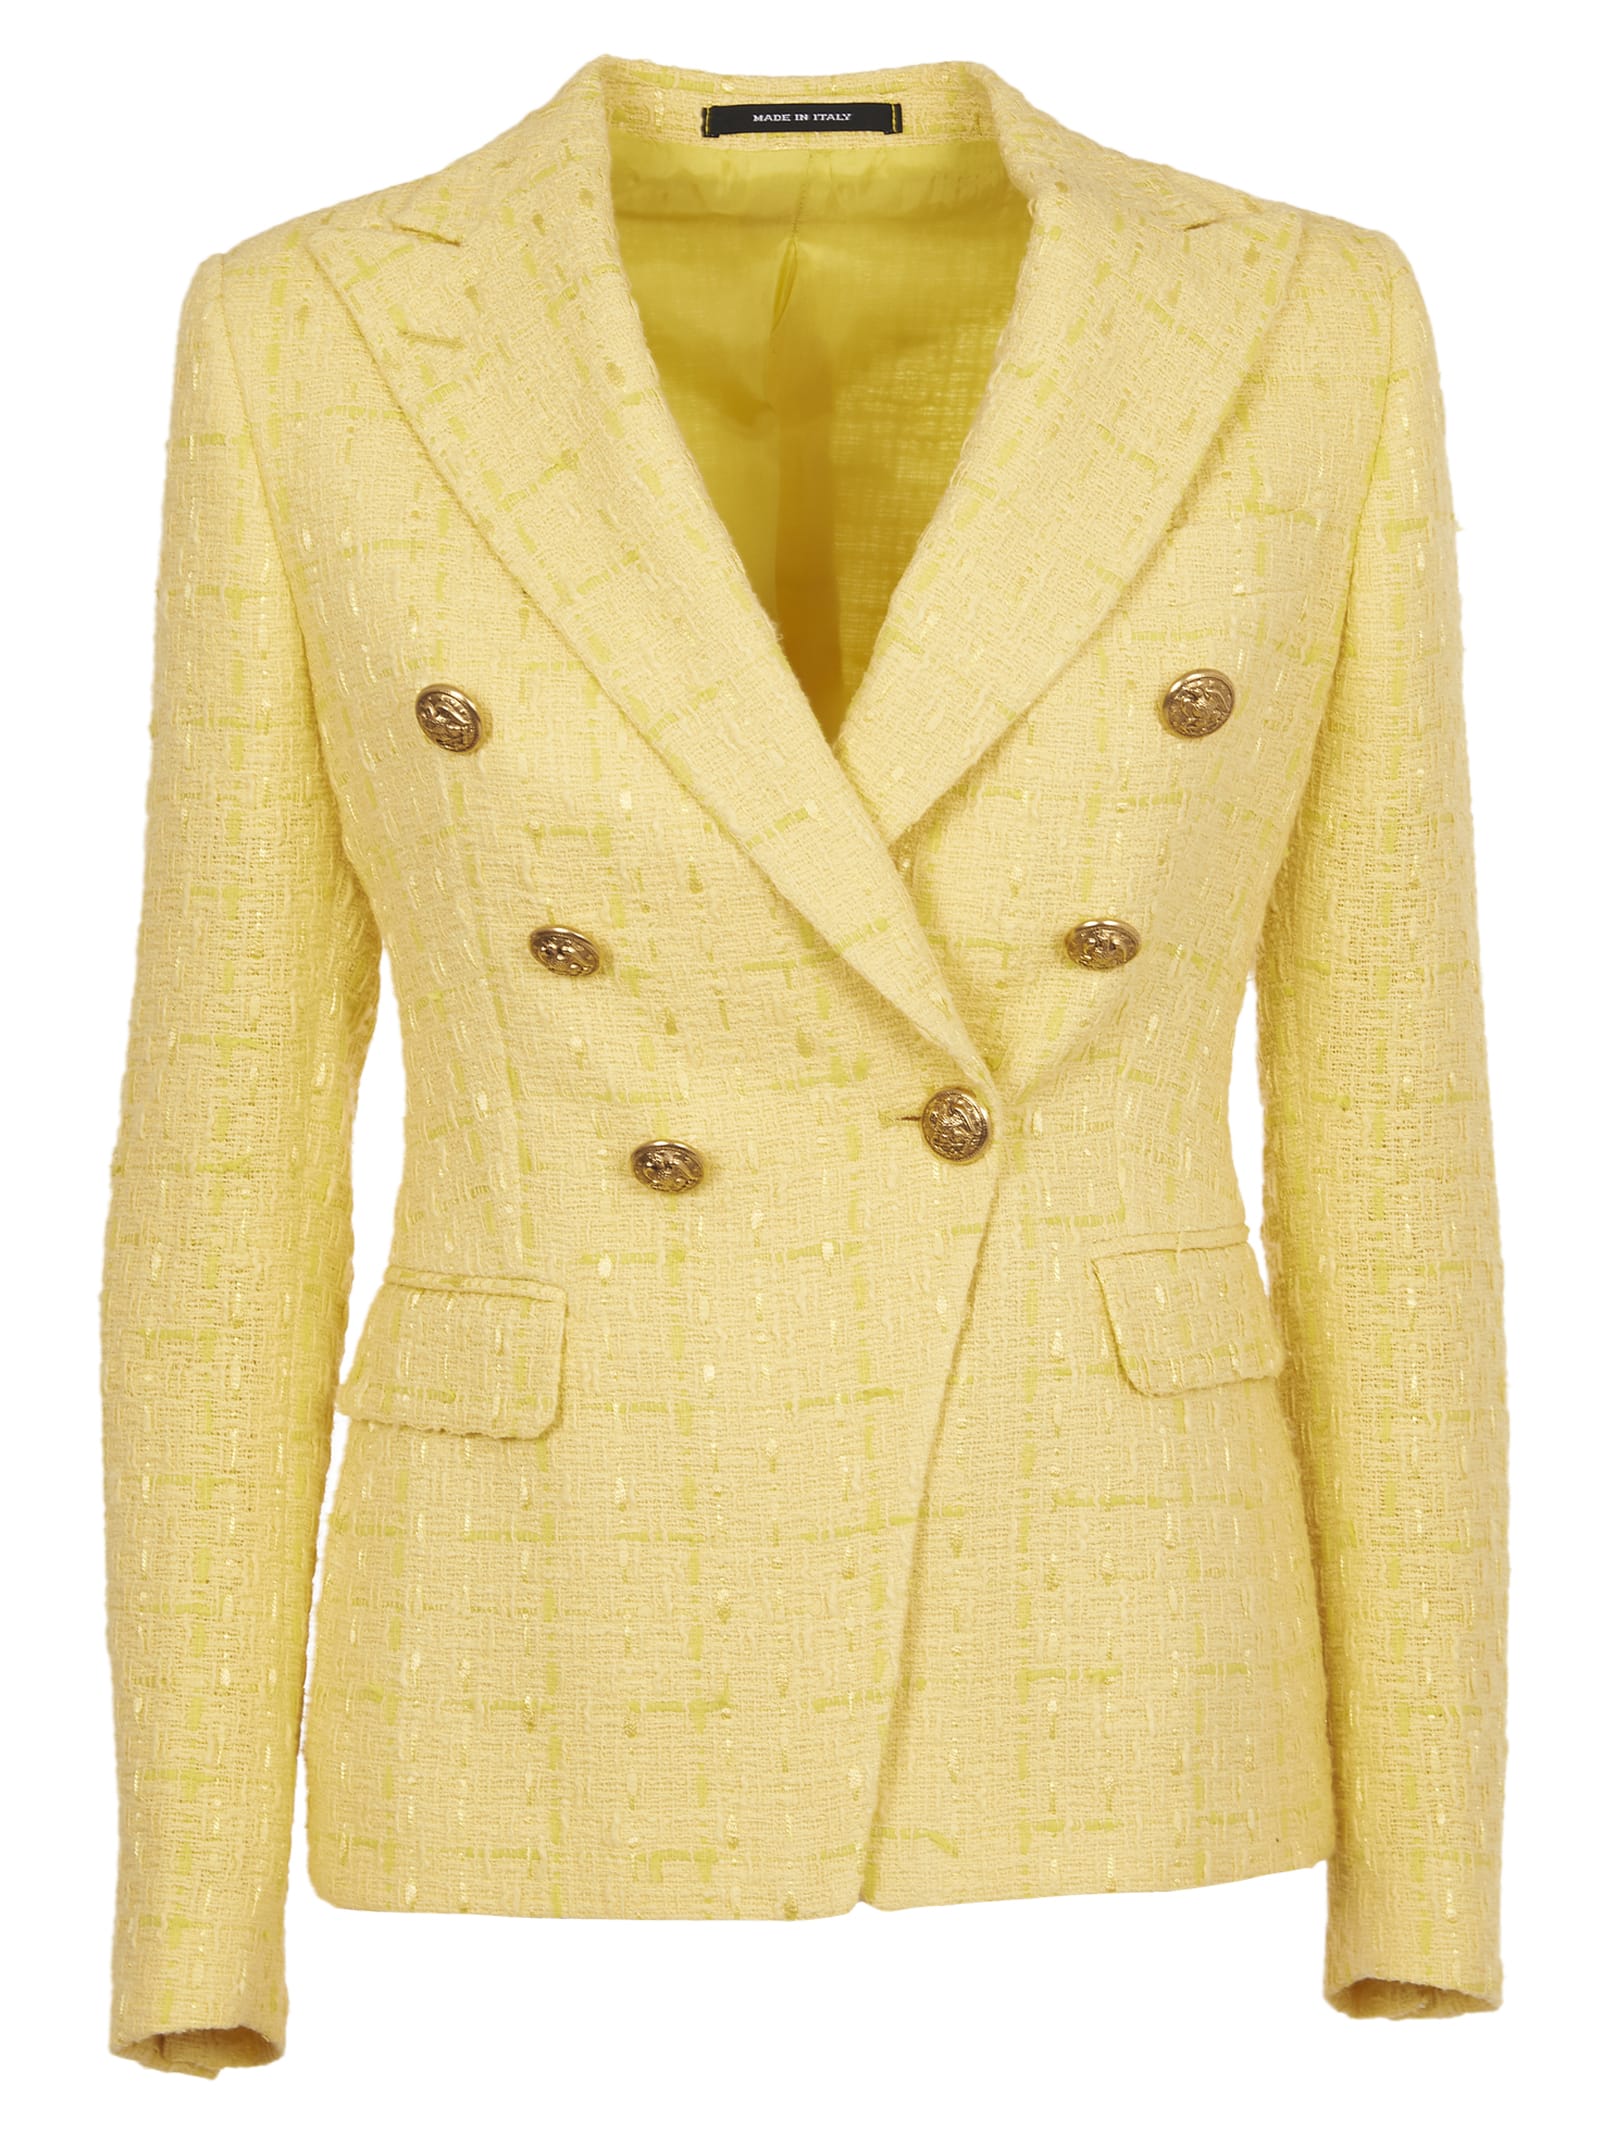 Tagliatore Yellow Double-breasted Jacket